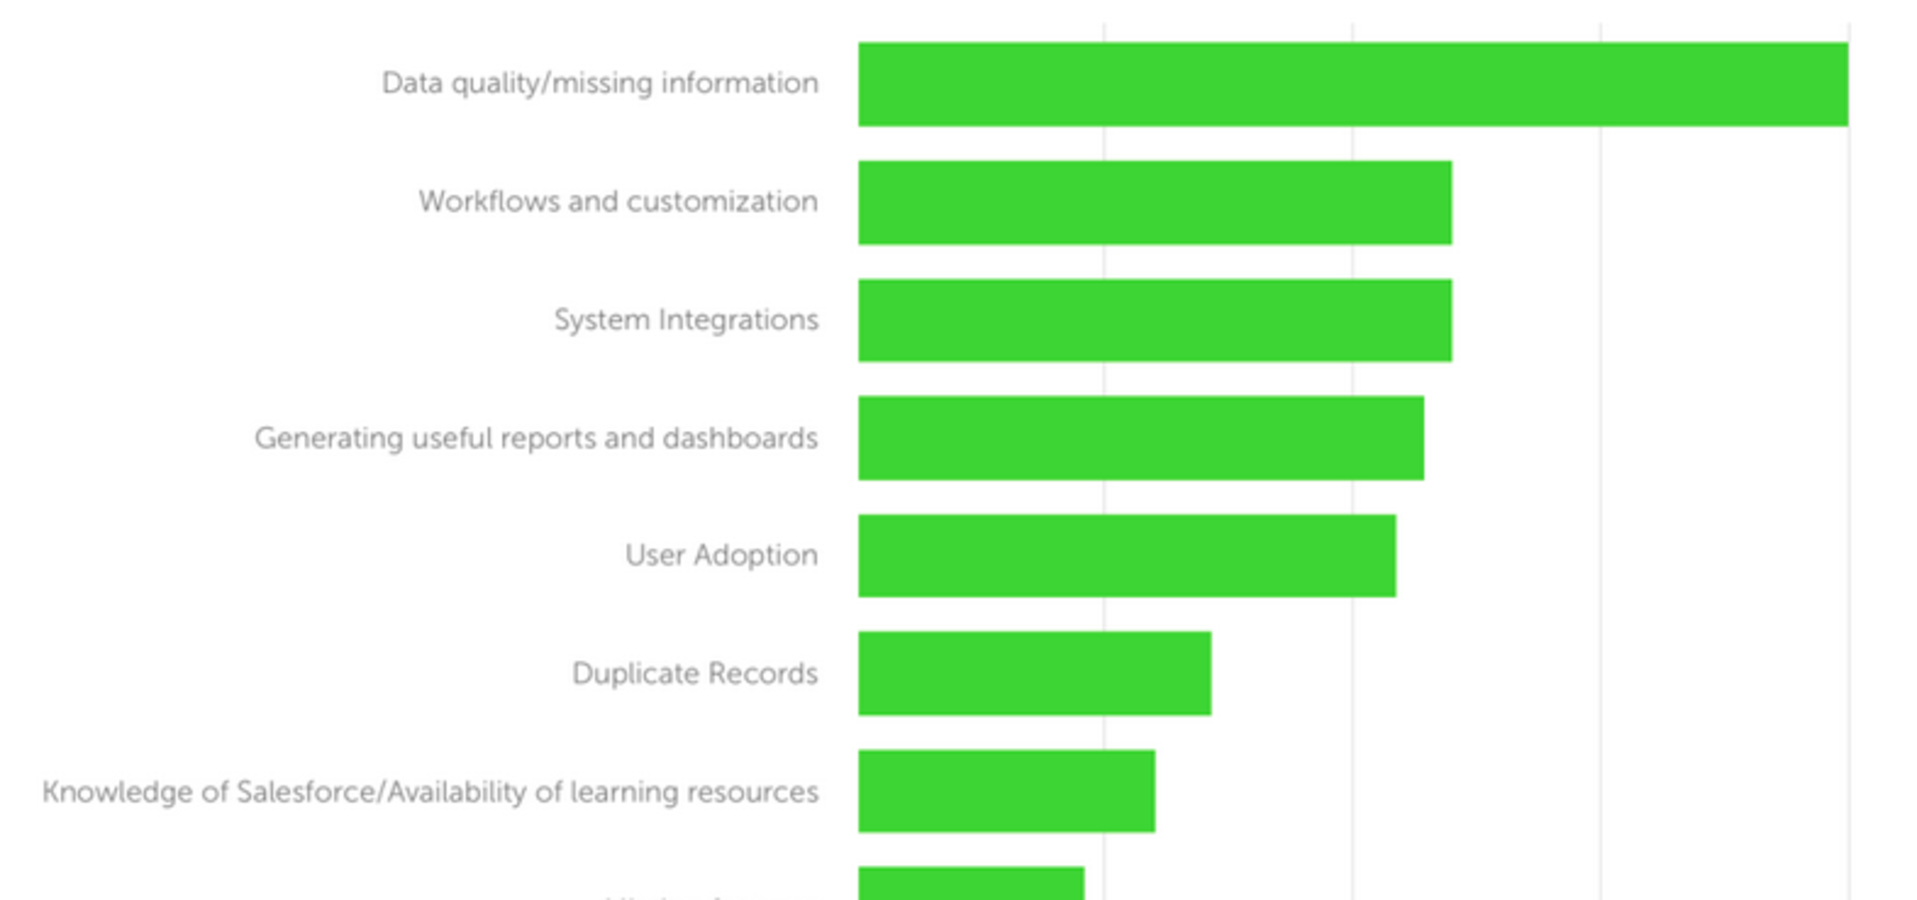 Bad Salesforce Data Quality? You’re Not Alone.